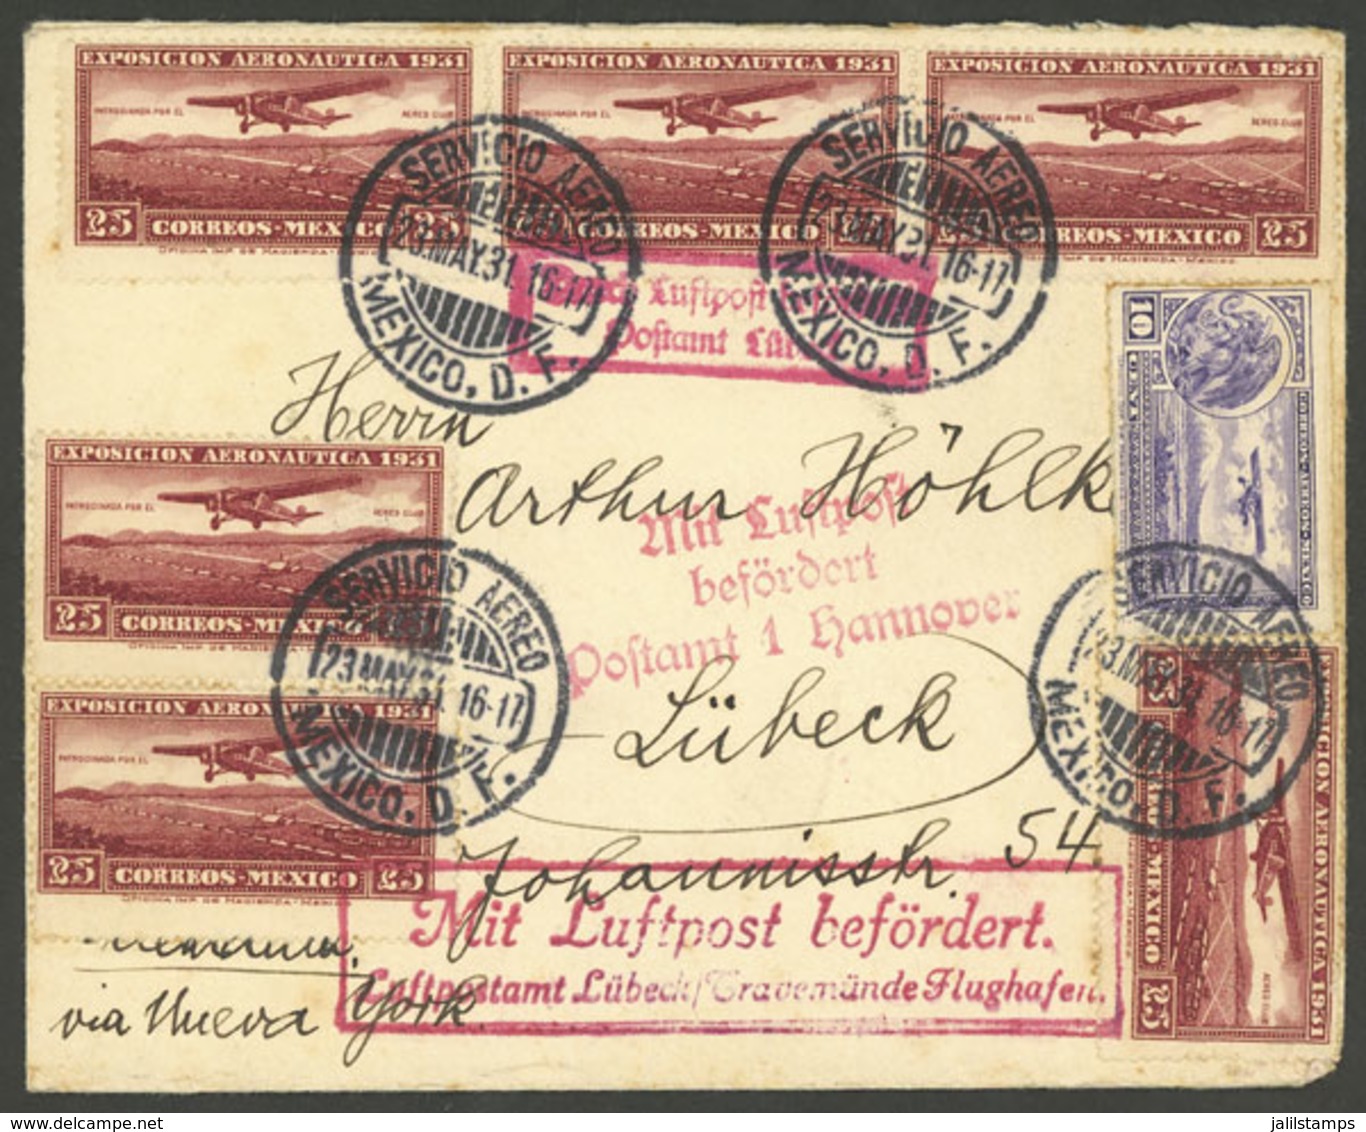 MEXICO: 23/MAY/1931 México - Germany, Airmail Cover With Very Nice Postage And On Back Special Handstamp Of Aeronautics  - Mexico